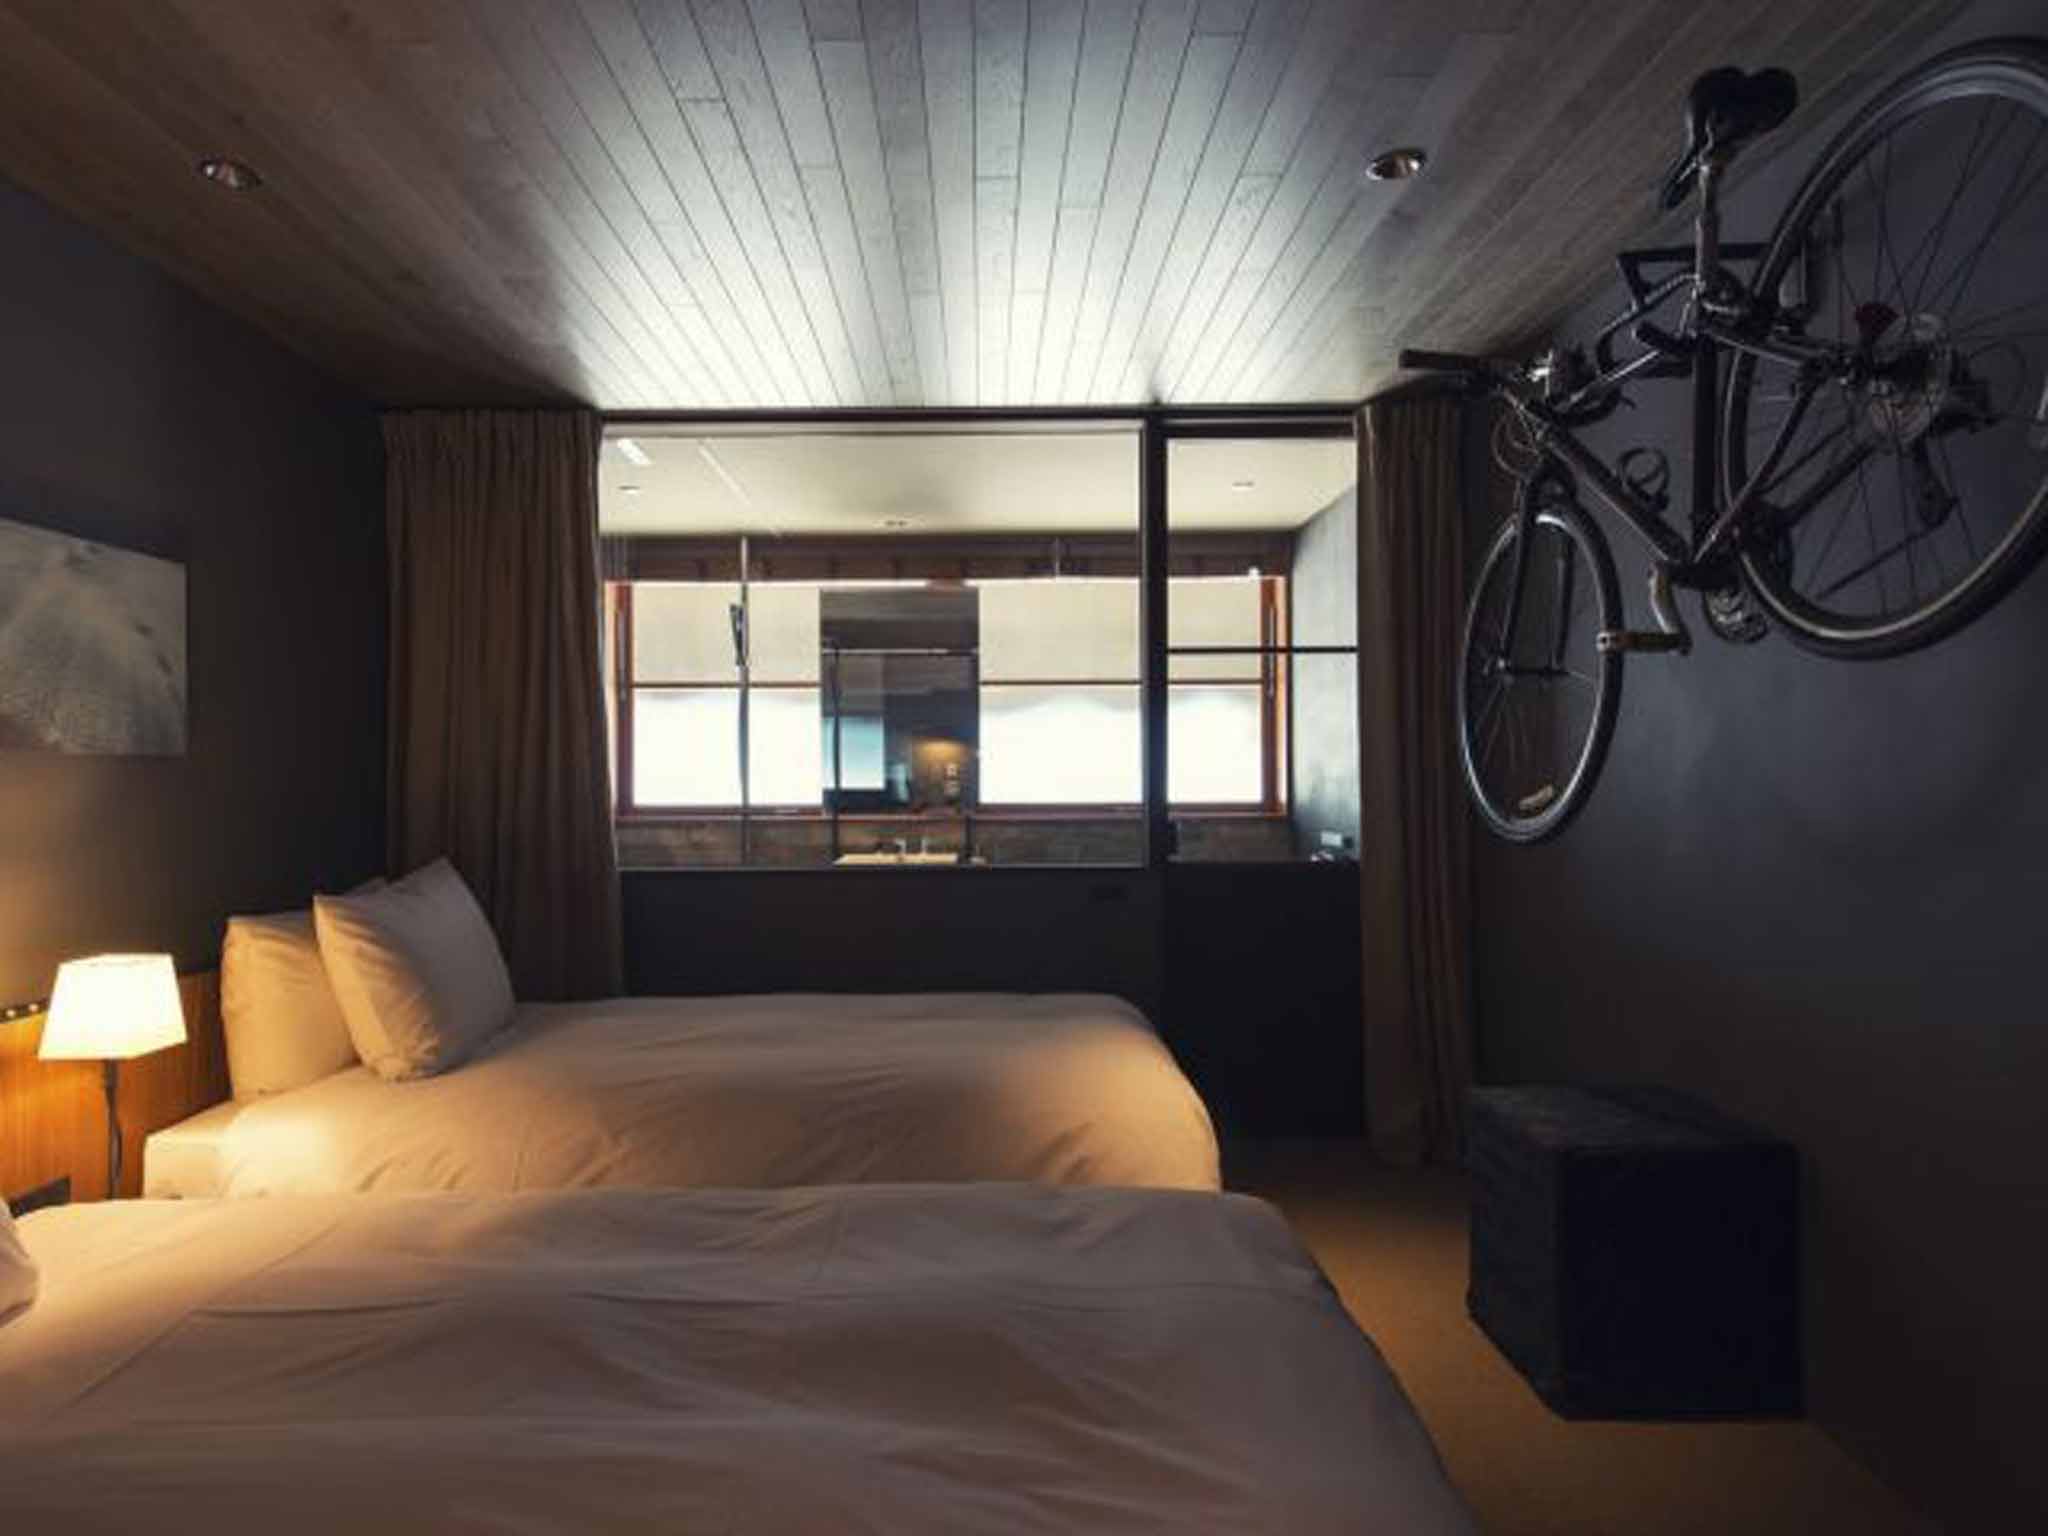 In a spin: one of the low-lit bedrooms